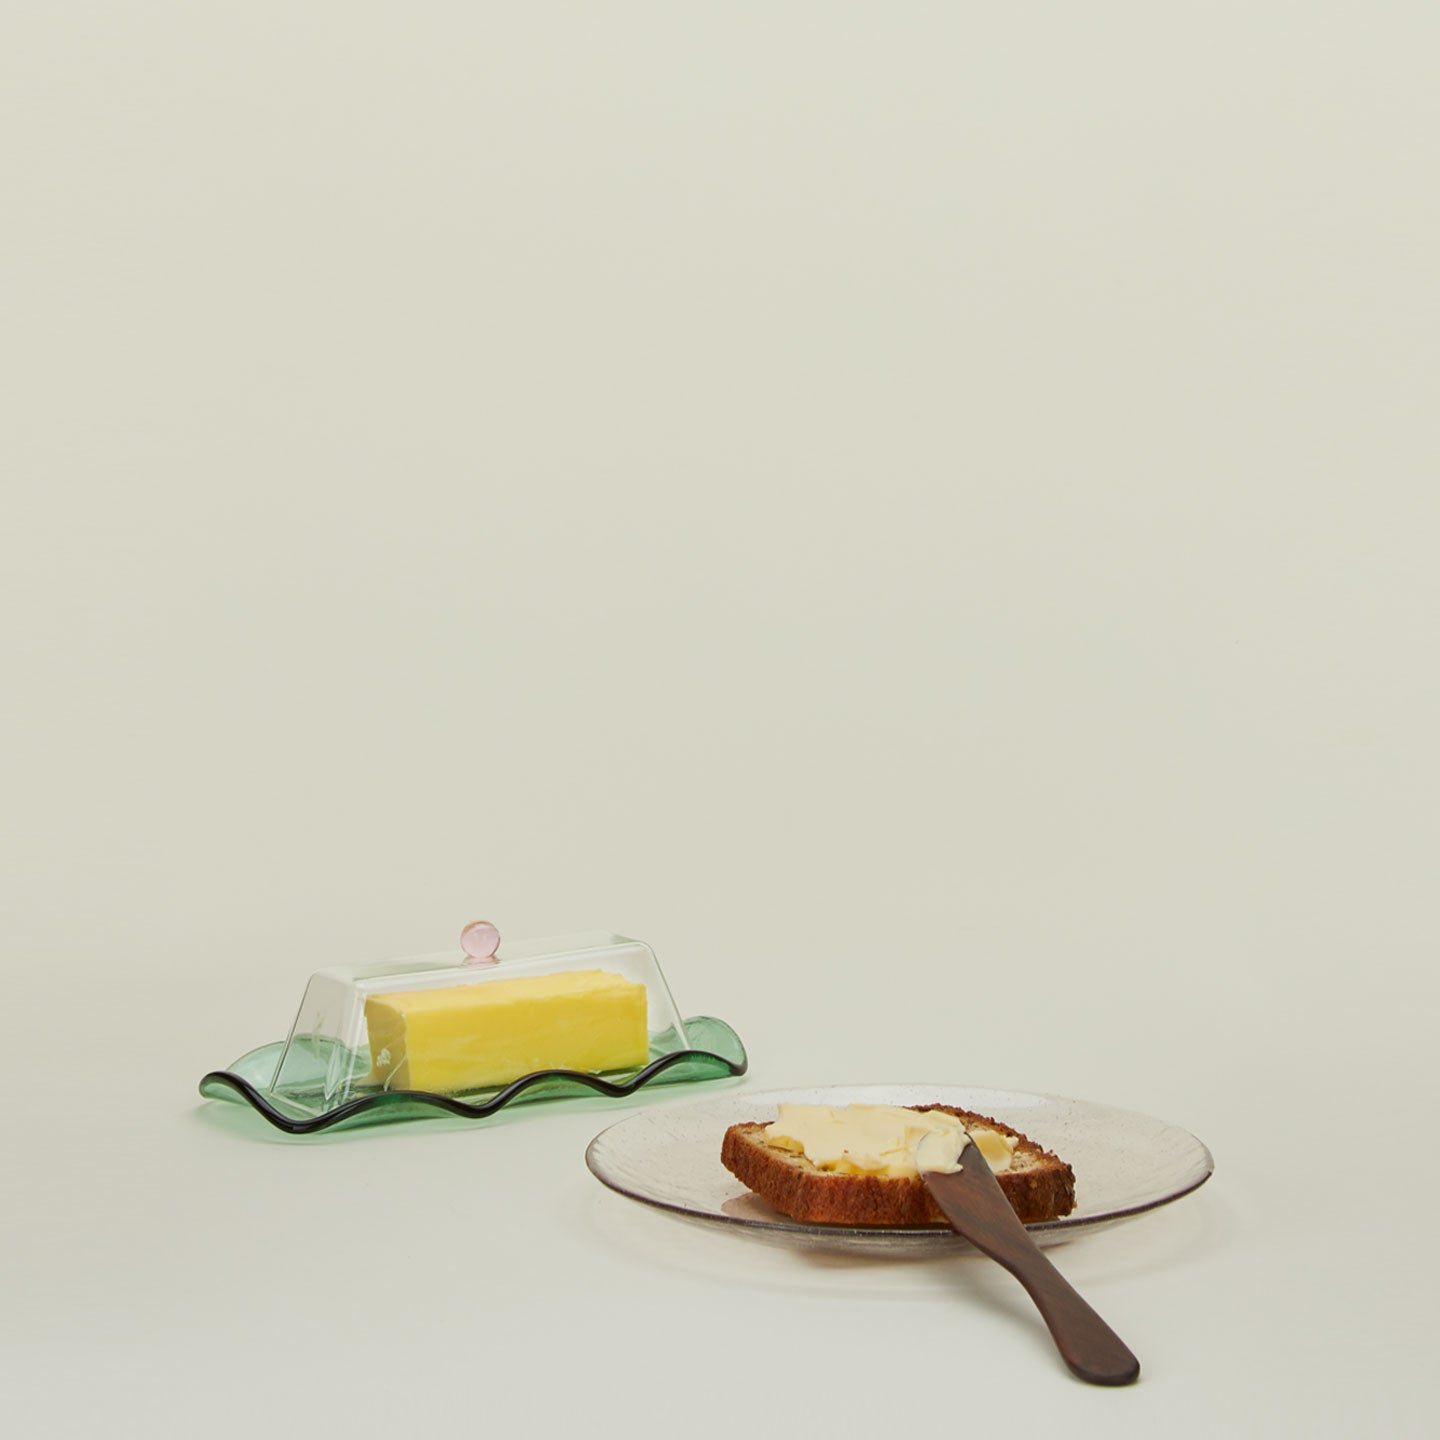 A glass butter dish with a stick of butter, a wood spreader, and a glass plate with buttered toast.